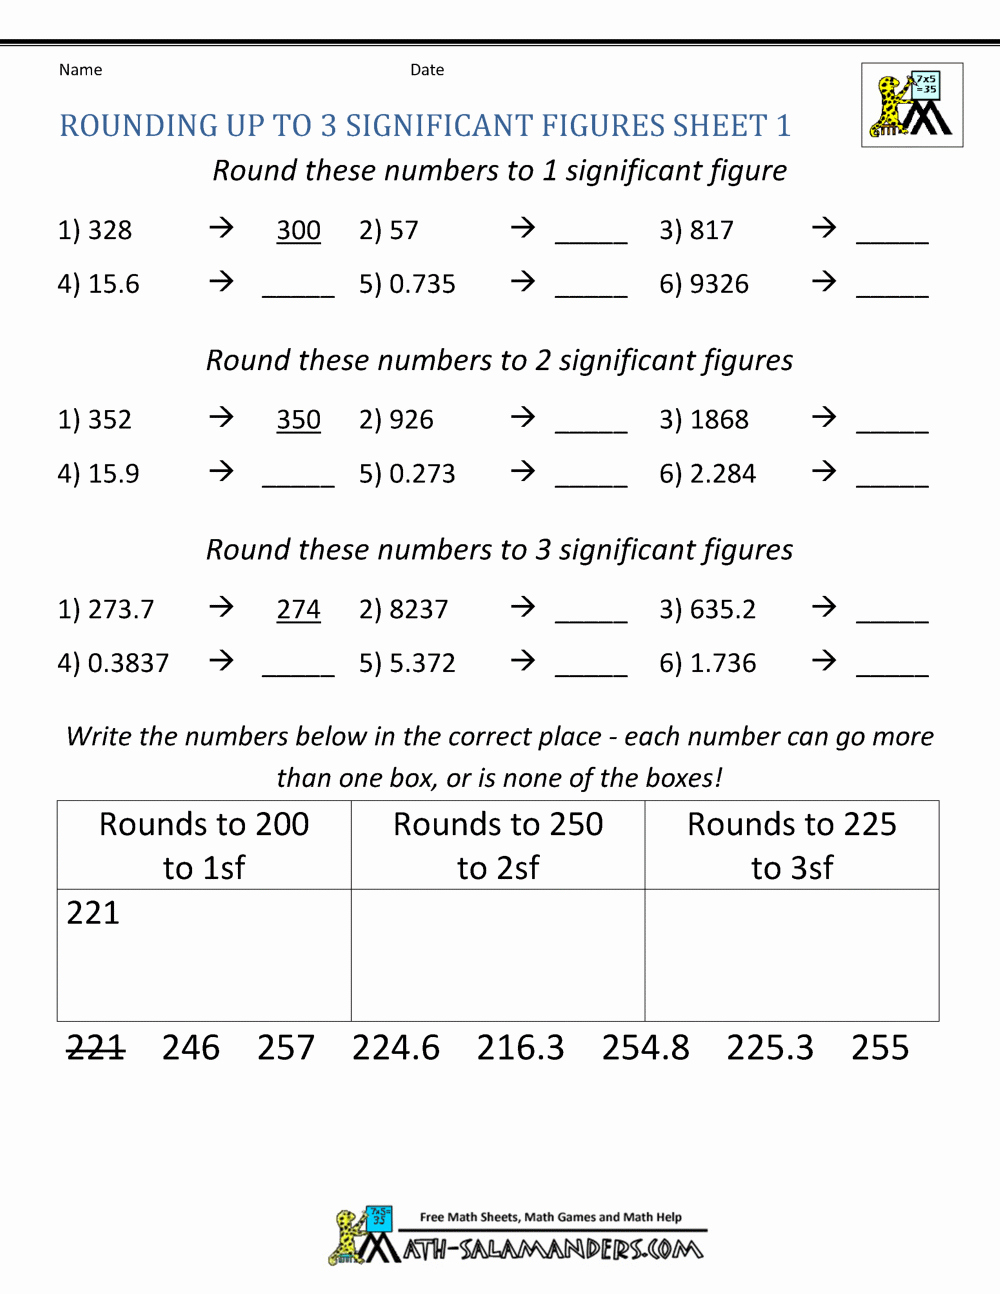 Significant Figures Worksheet with Answers Luxury Rounding Significant Figures